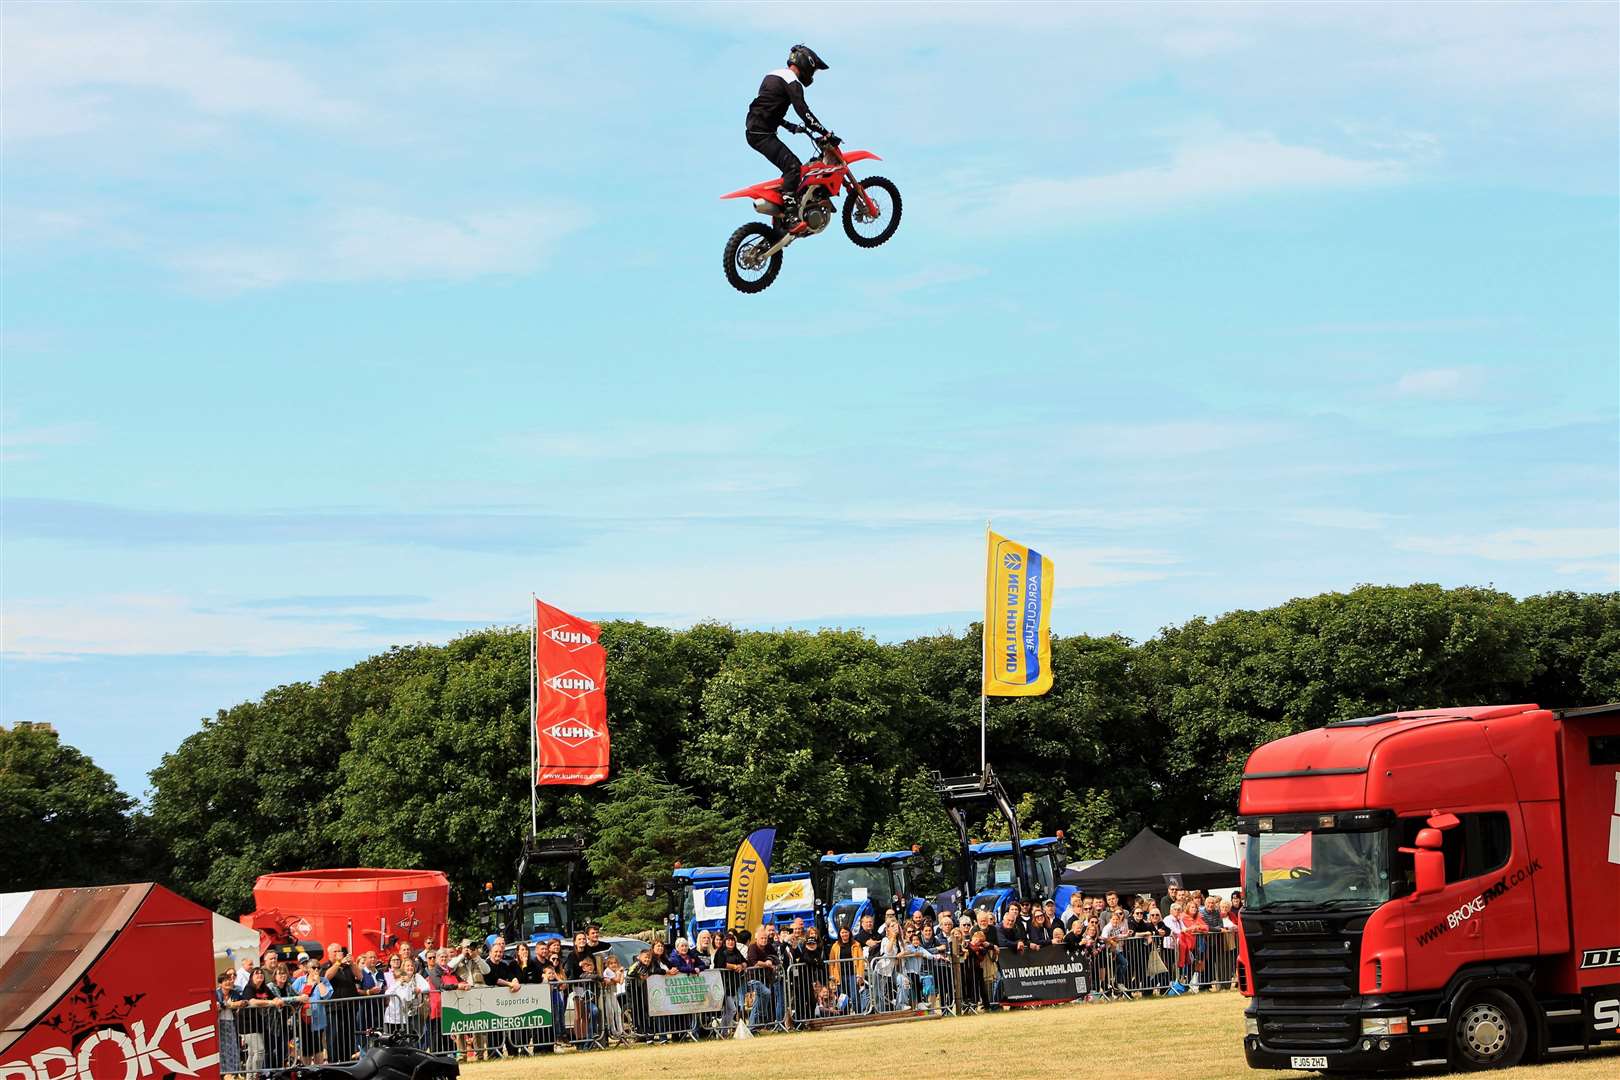 The Broke FMX rider flies close to 40ft in the air. Picture: Alan Hendry